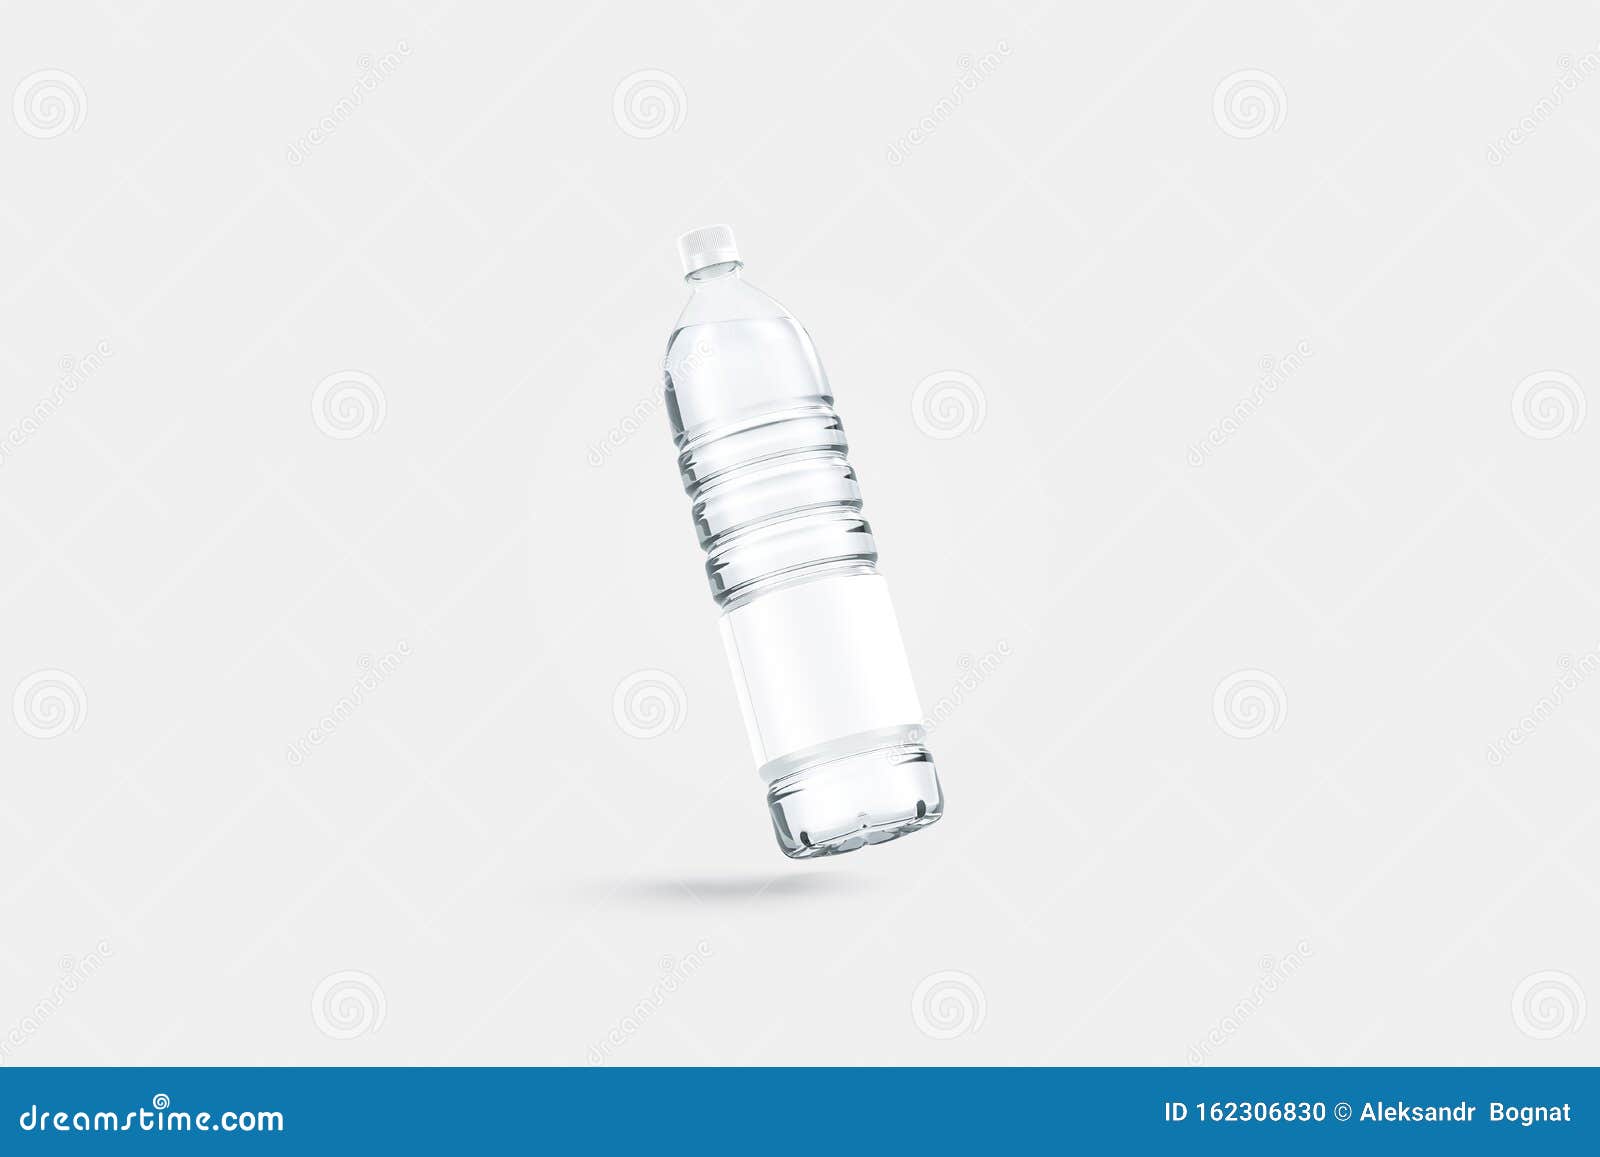 blank transparent plastic bottle with water mockup, no gravity